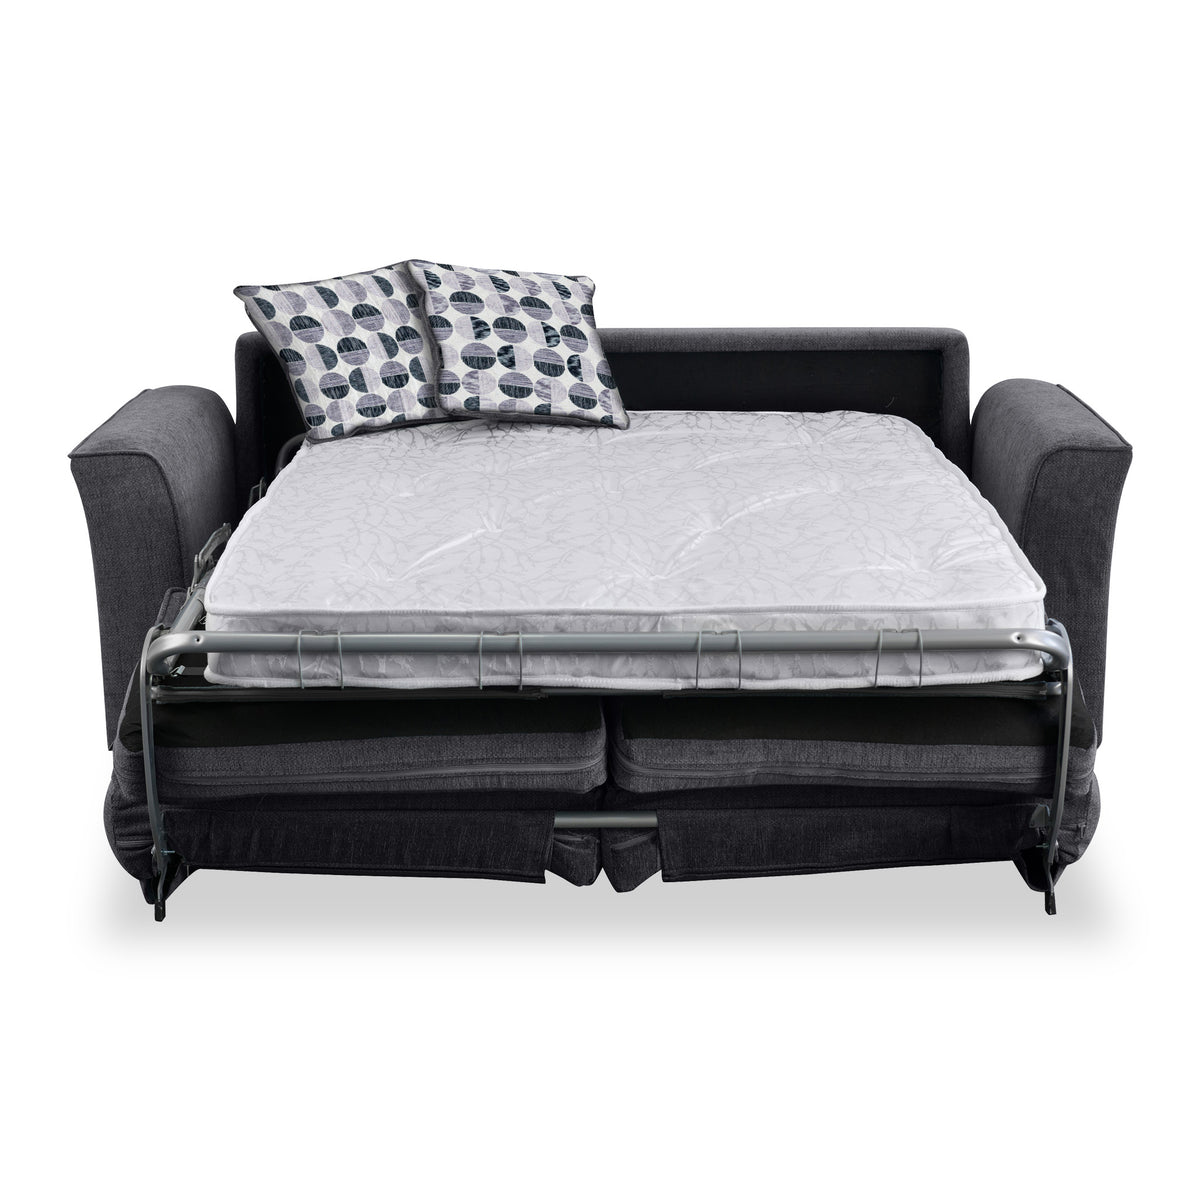 Abbott 2 Seater Sofabed in Charcoal with Rufus Mono Cushions by Roseland Furniture